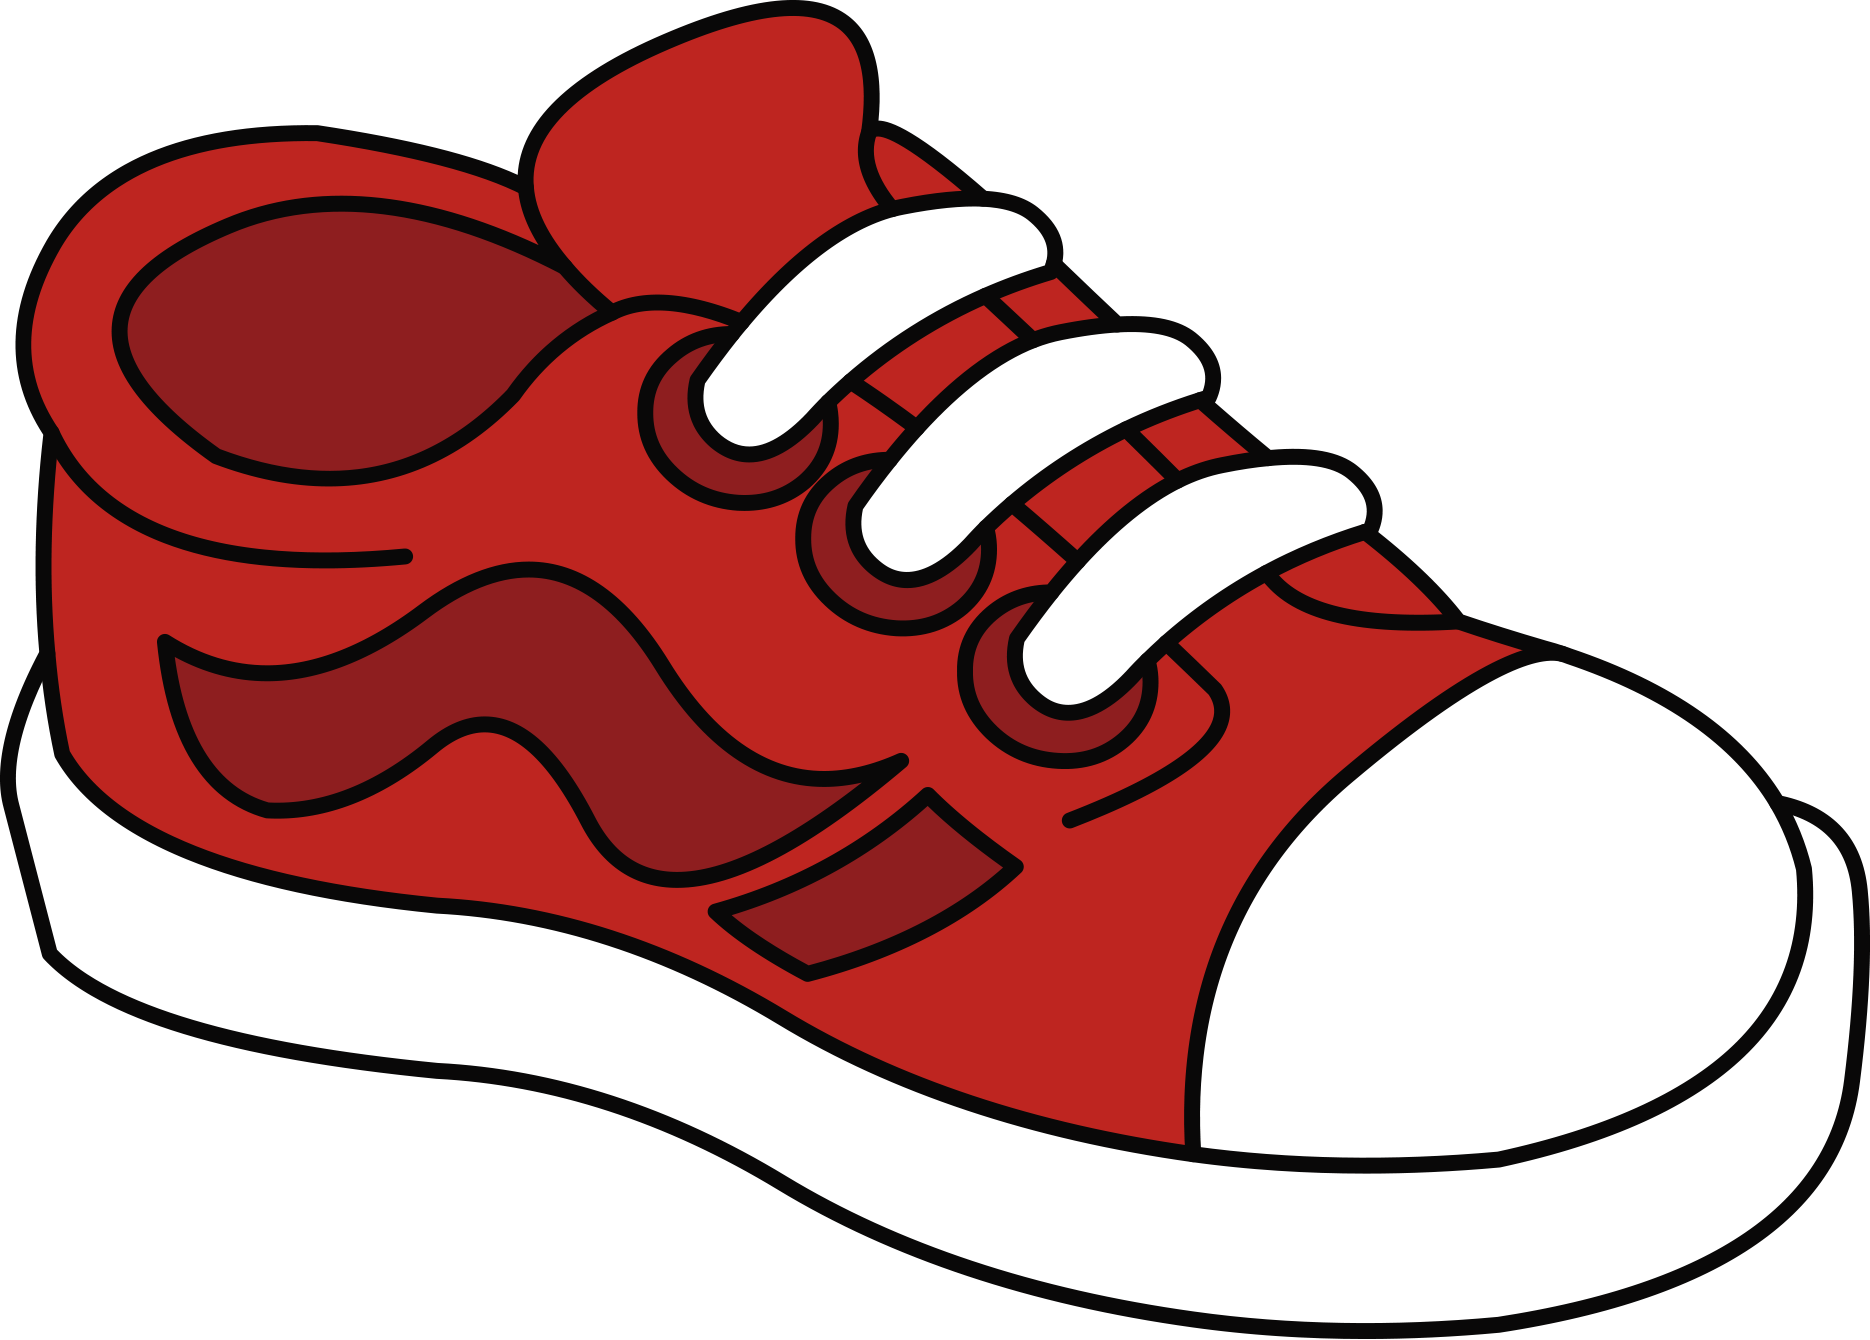 Clip art shoes clipart images gallery for free download